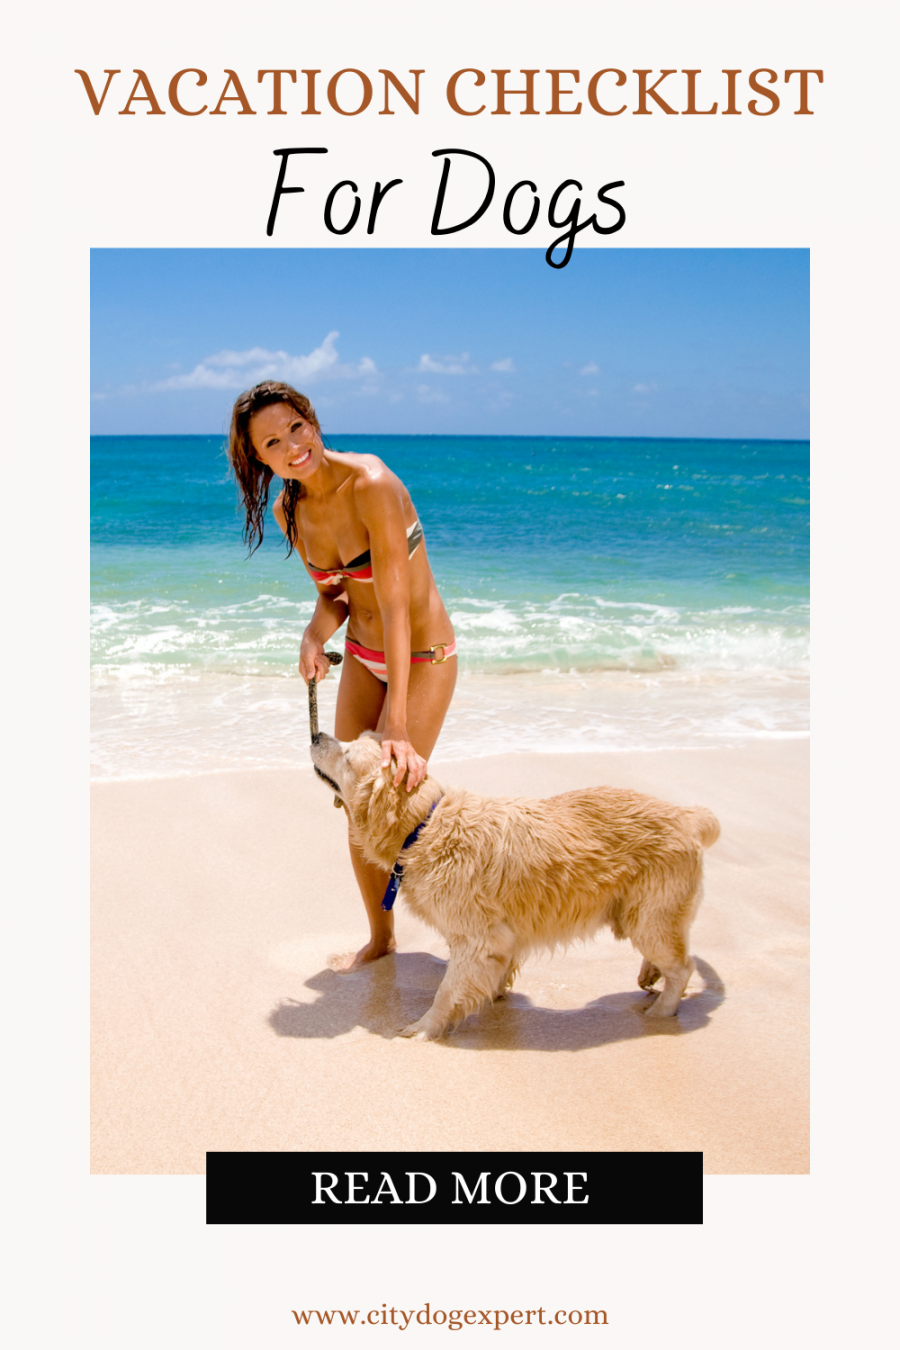 lady on the beach with her dog and reads "texvacation checklist for dogs"